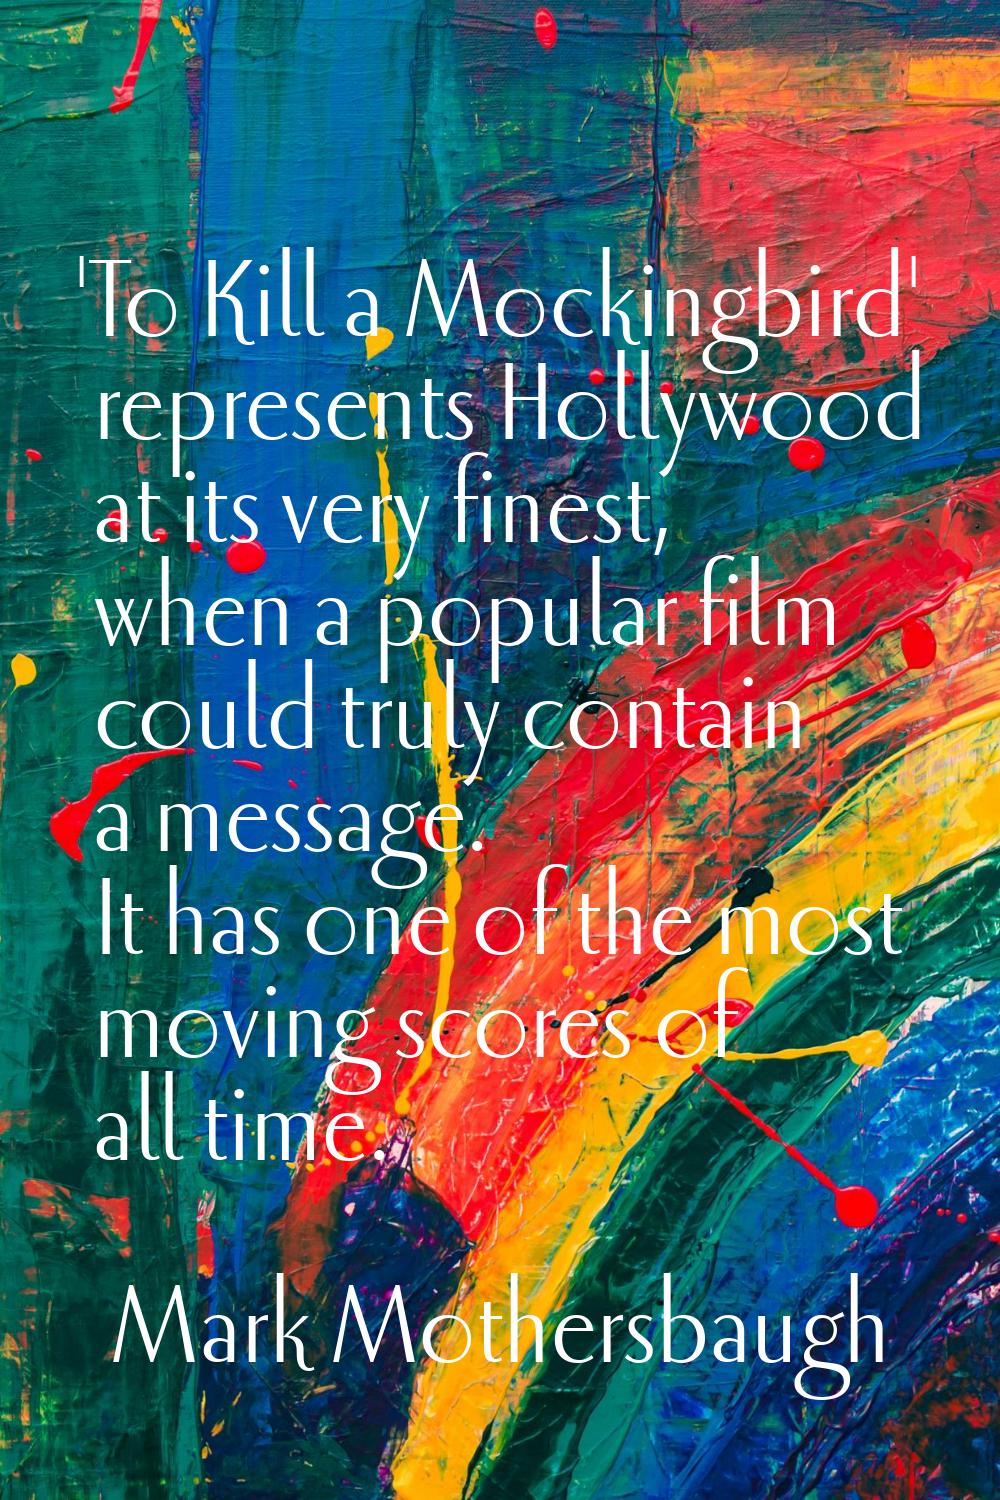 'To Kill a Mockingbird' represents Hollywood at its very finest, when a popular film could truly co